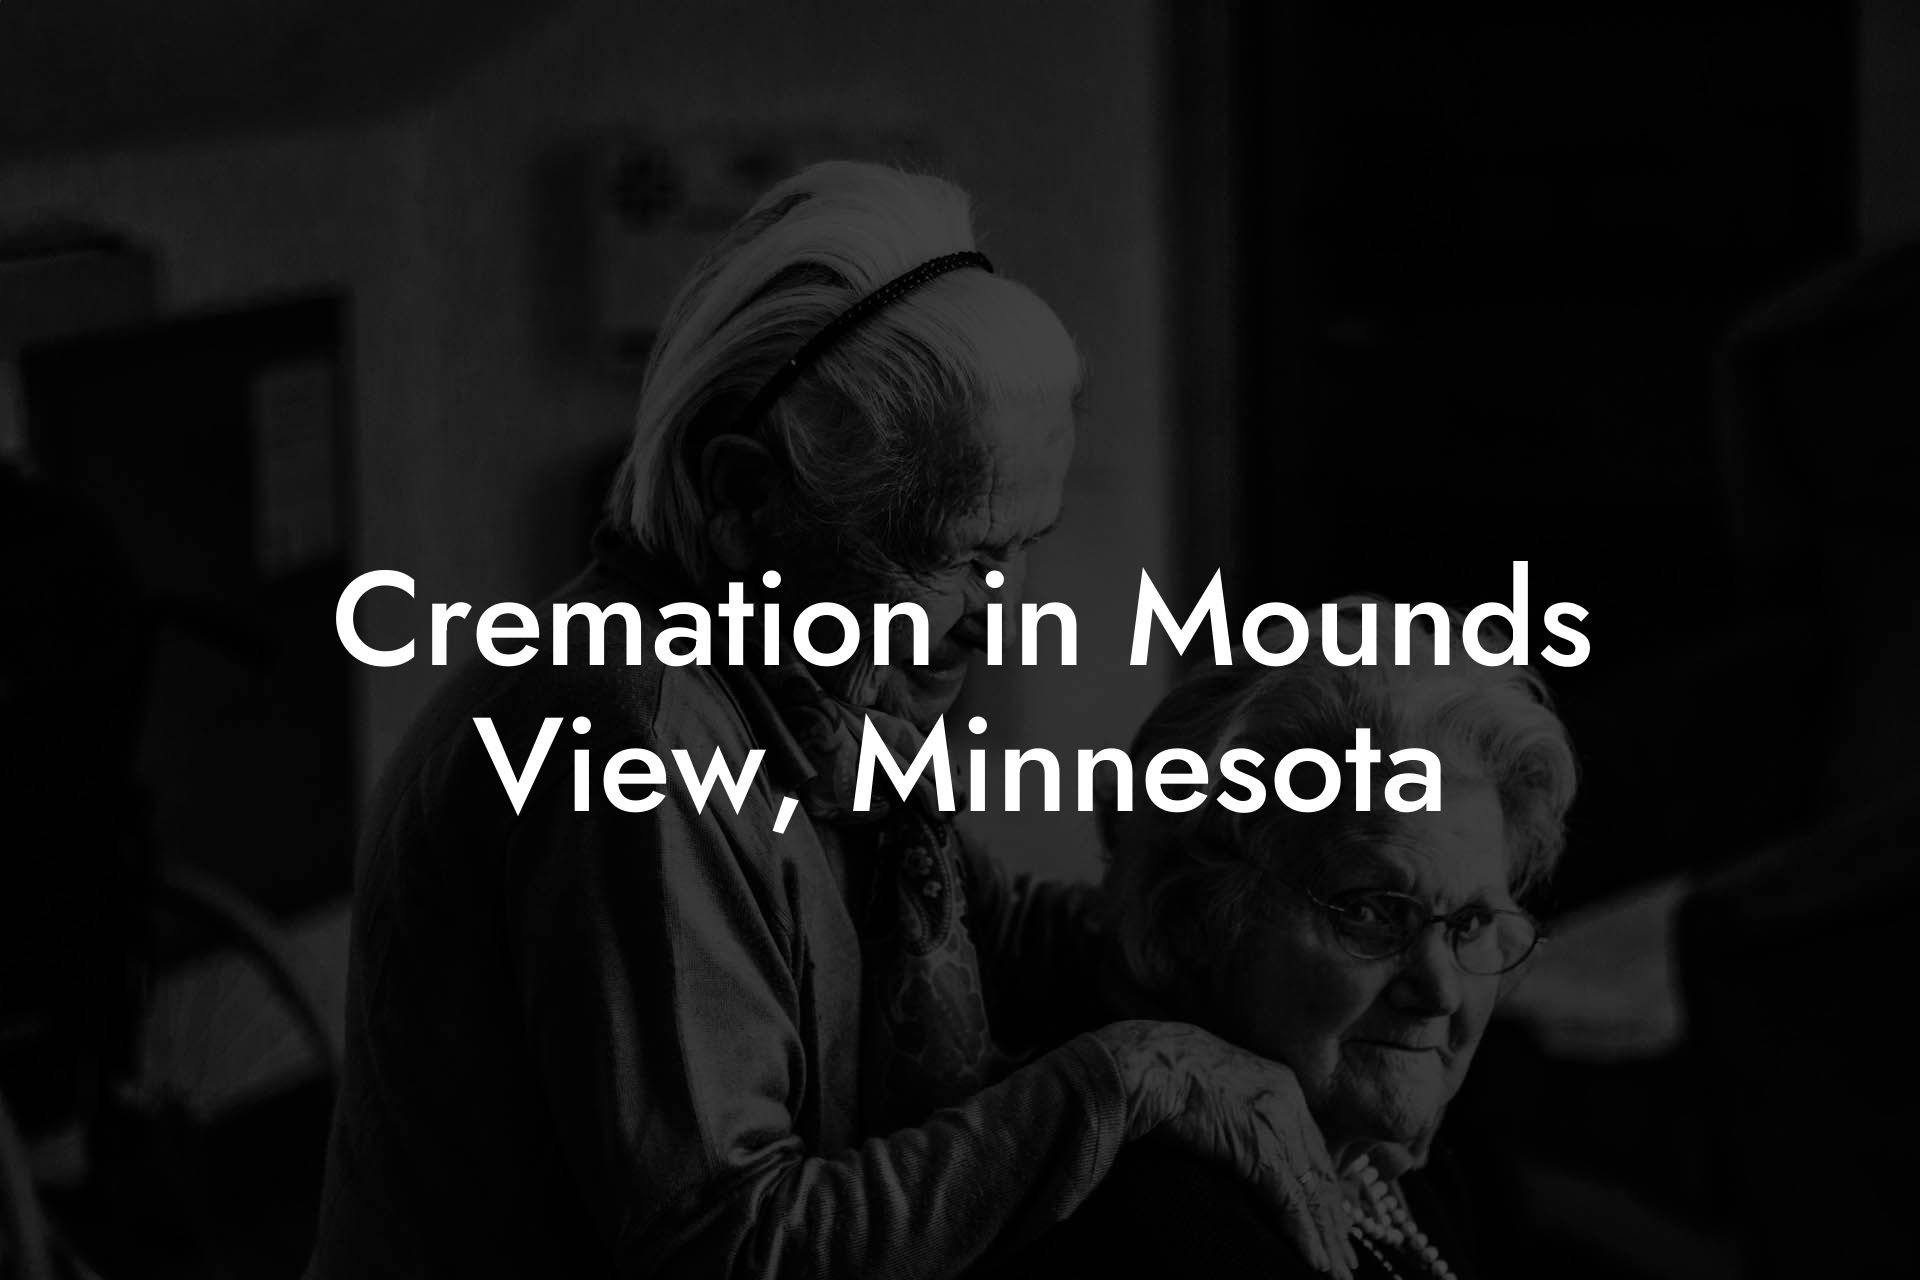 Cremation in Mounds View, Minnesota